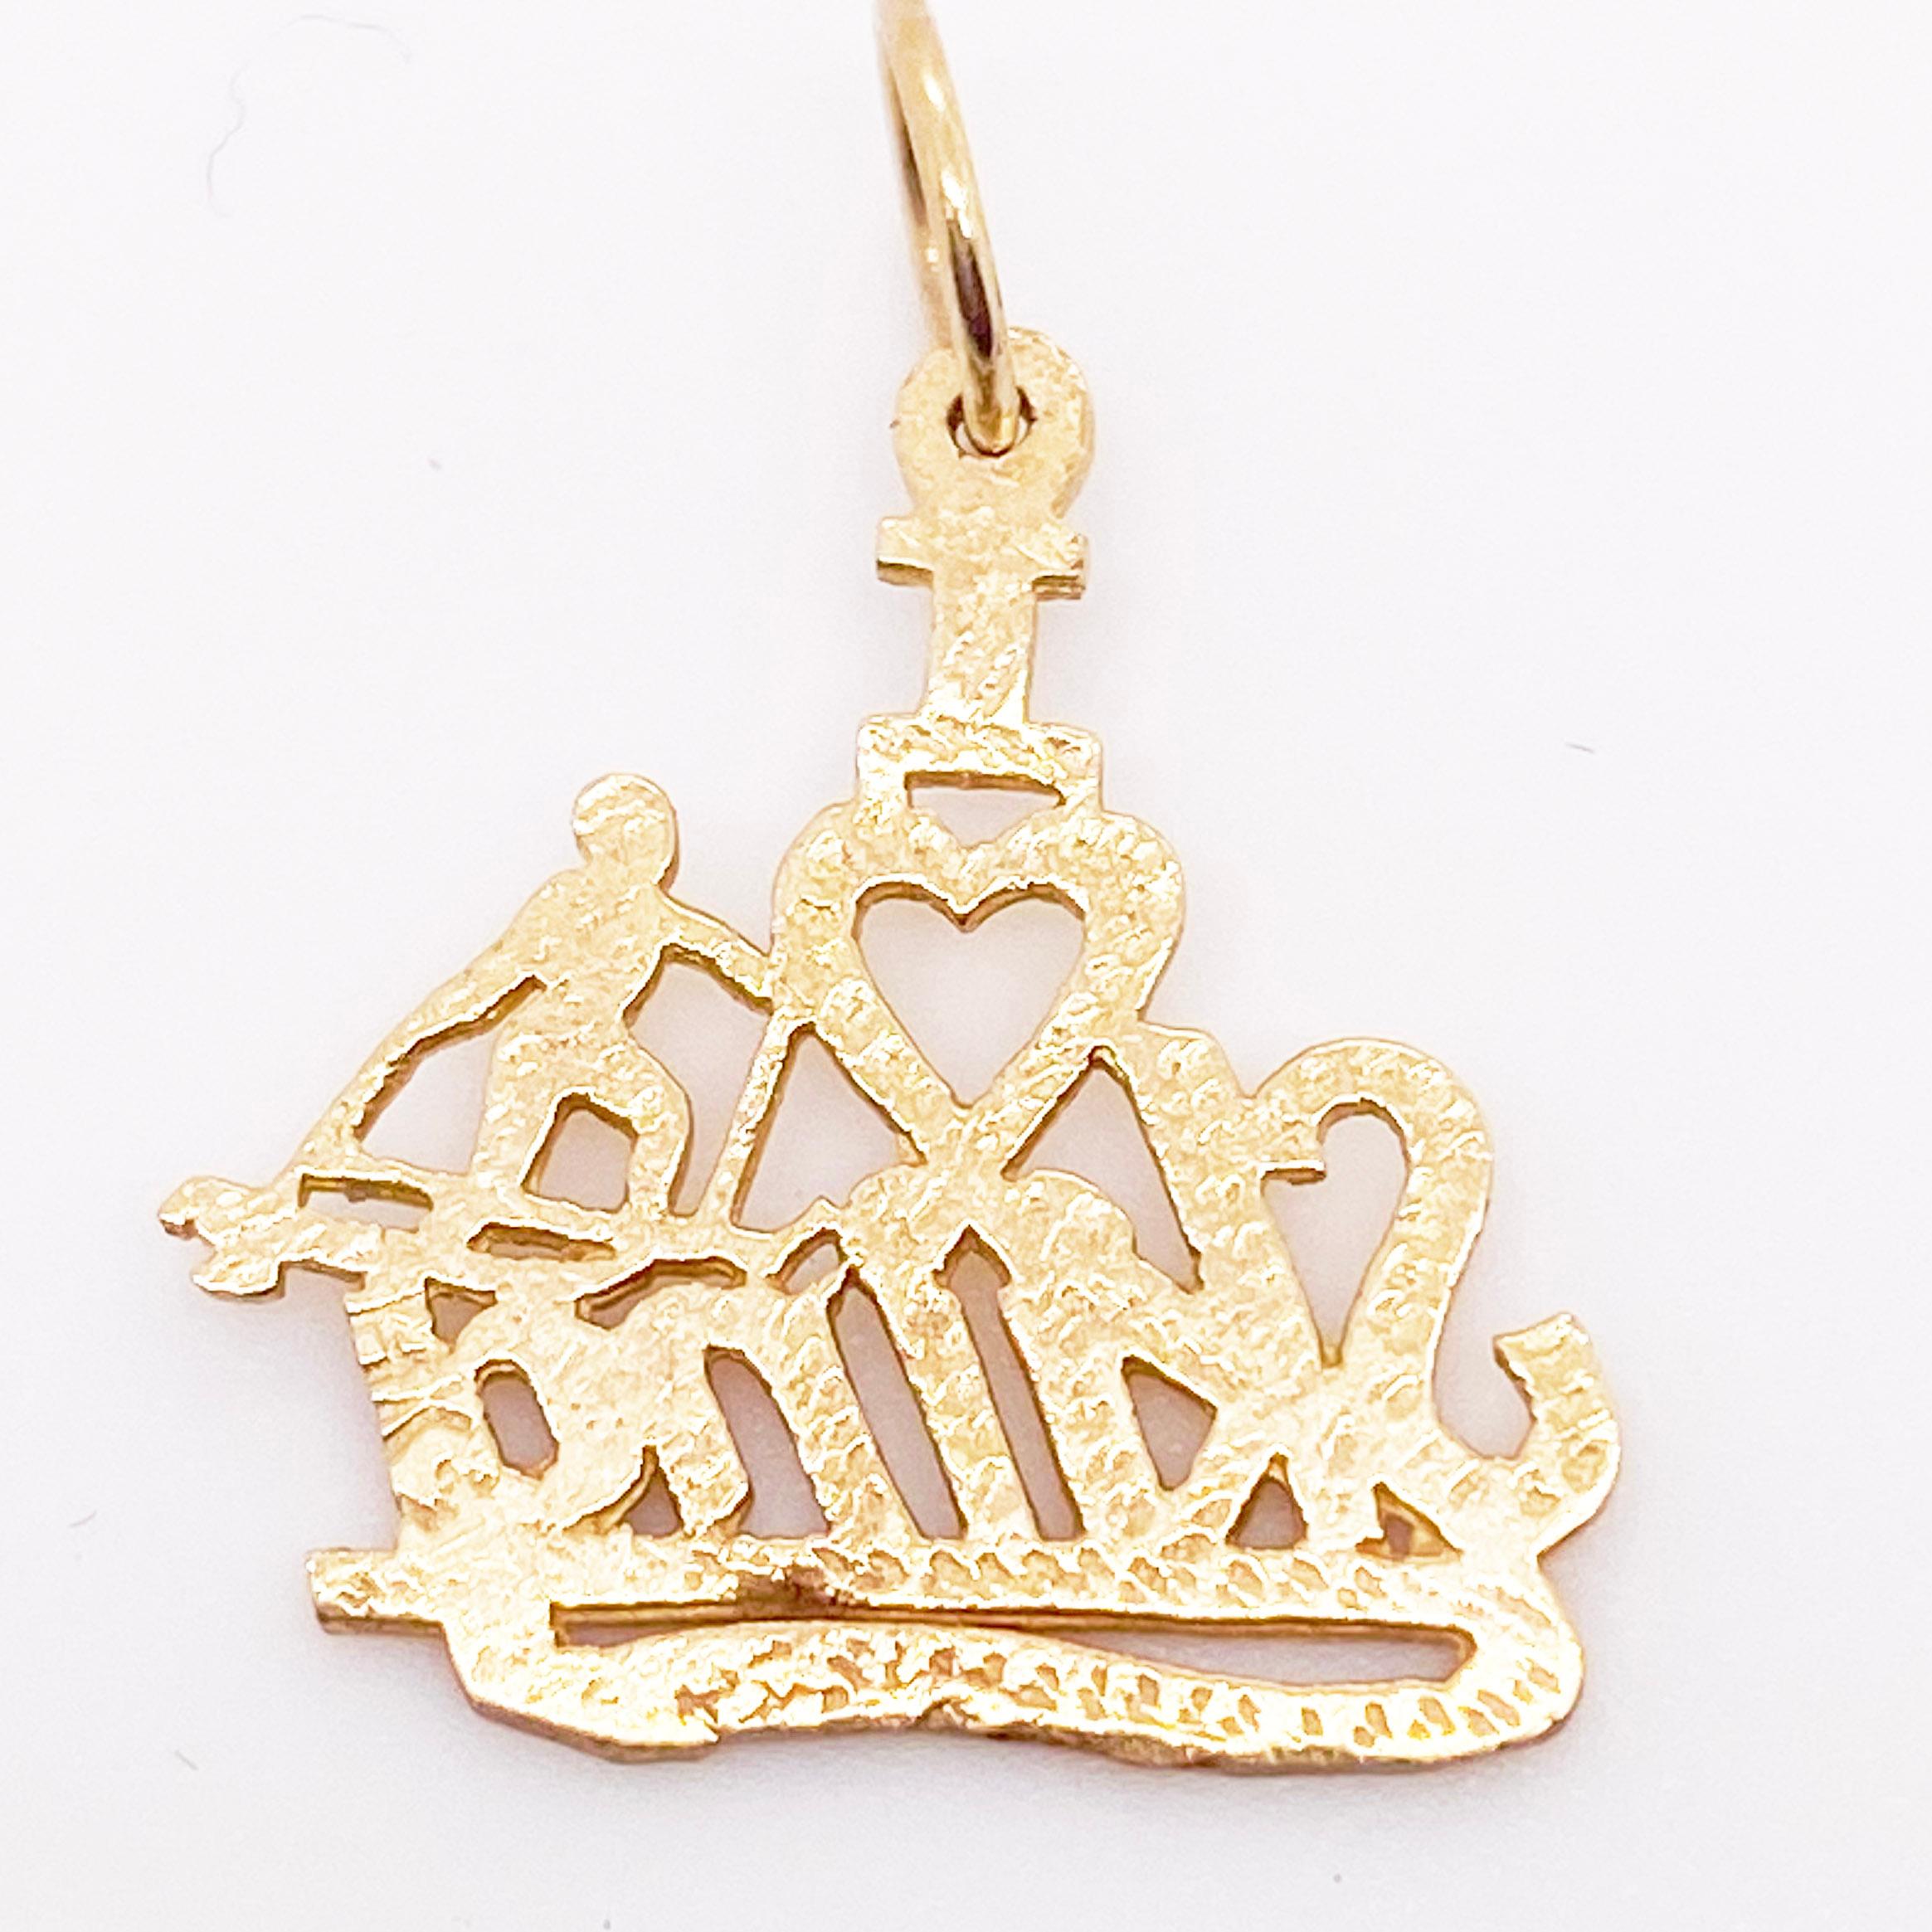 Contemporary Love Skiing Charm or Pendant, 14K Yellow Gold, Stamped Out, I Love Skiing Charm